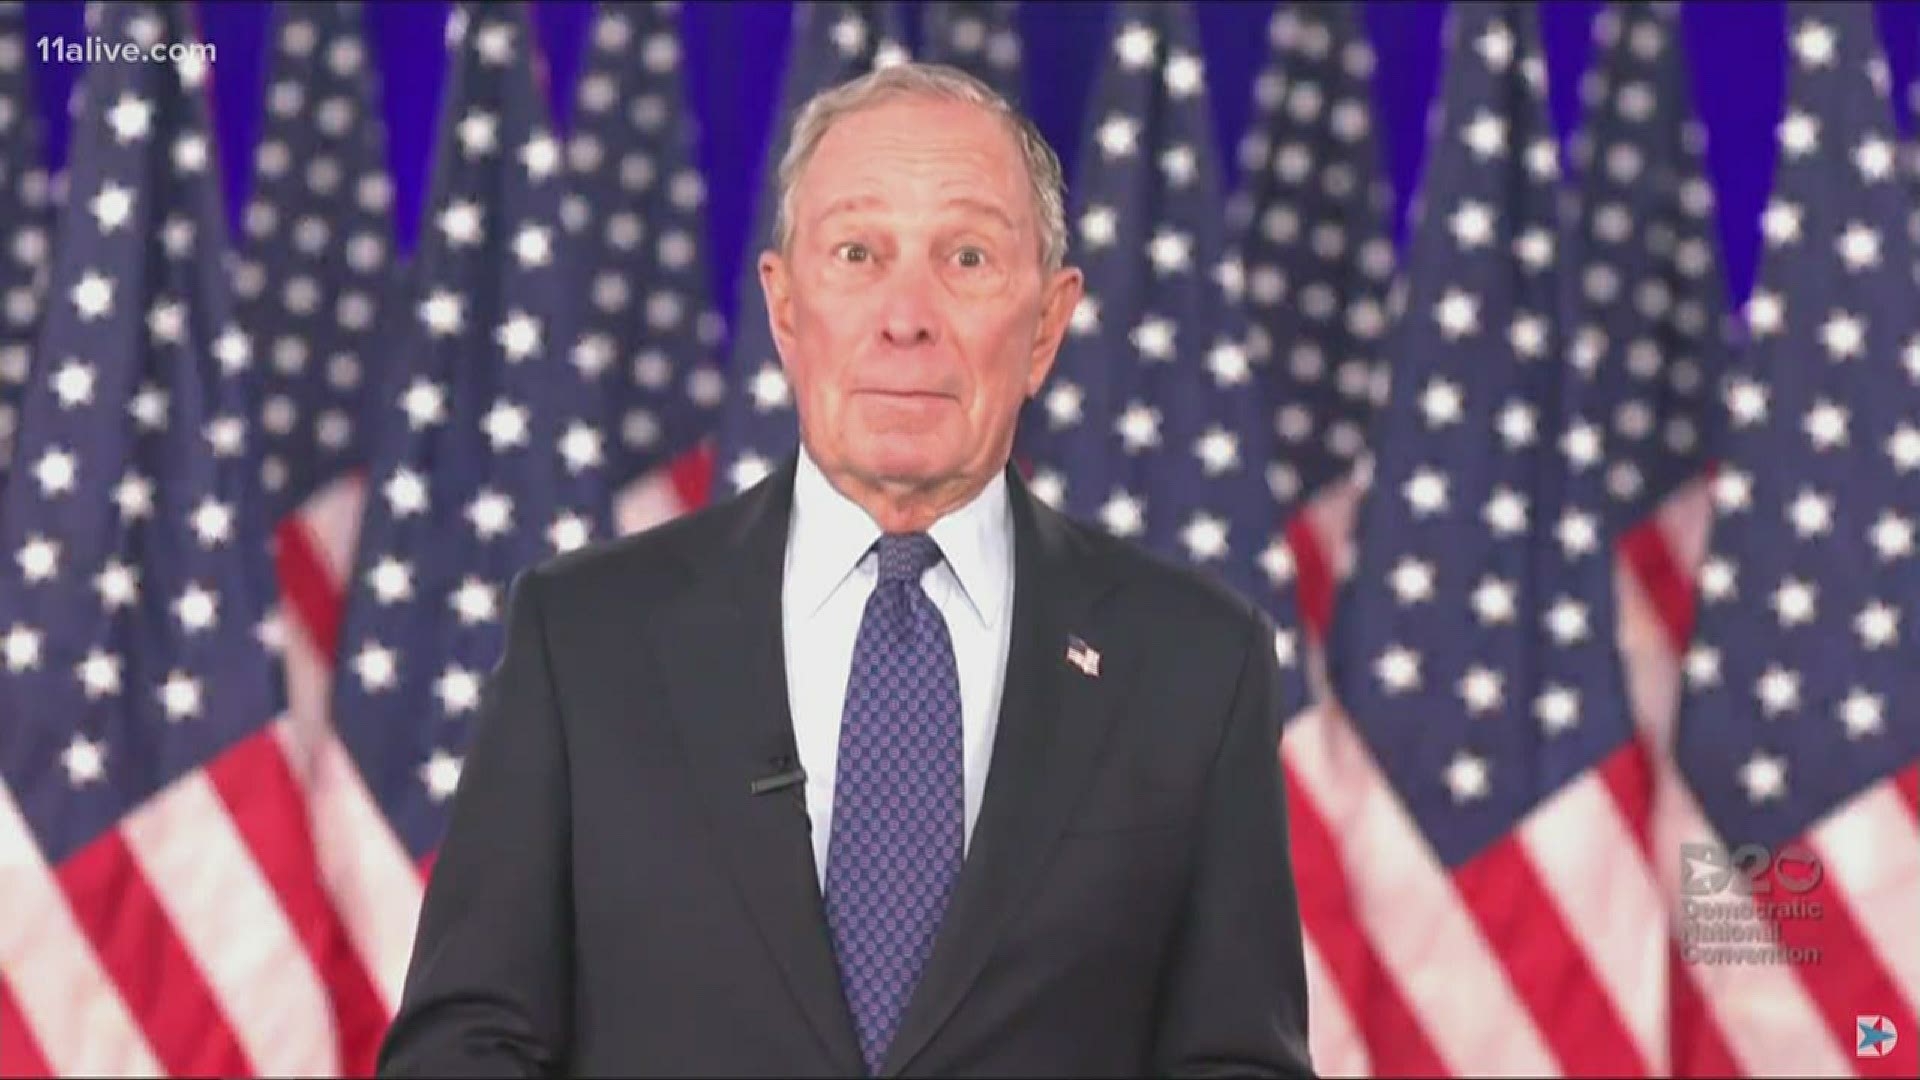 Bloomberg delivered remarks on the final night of the DNC.